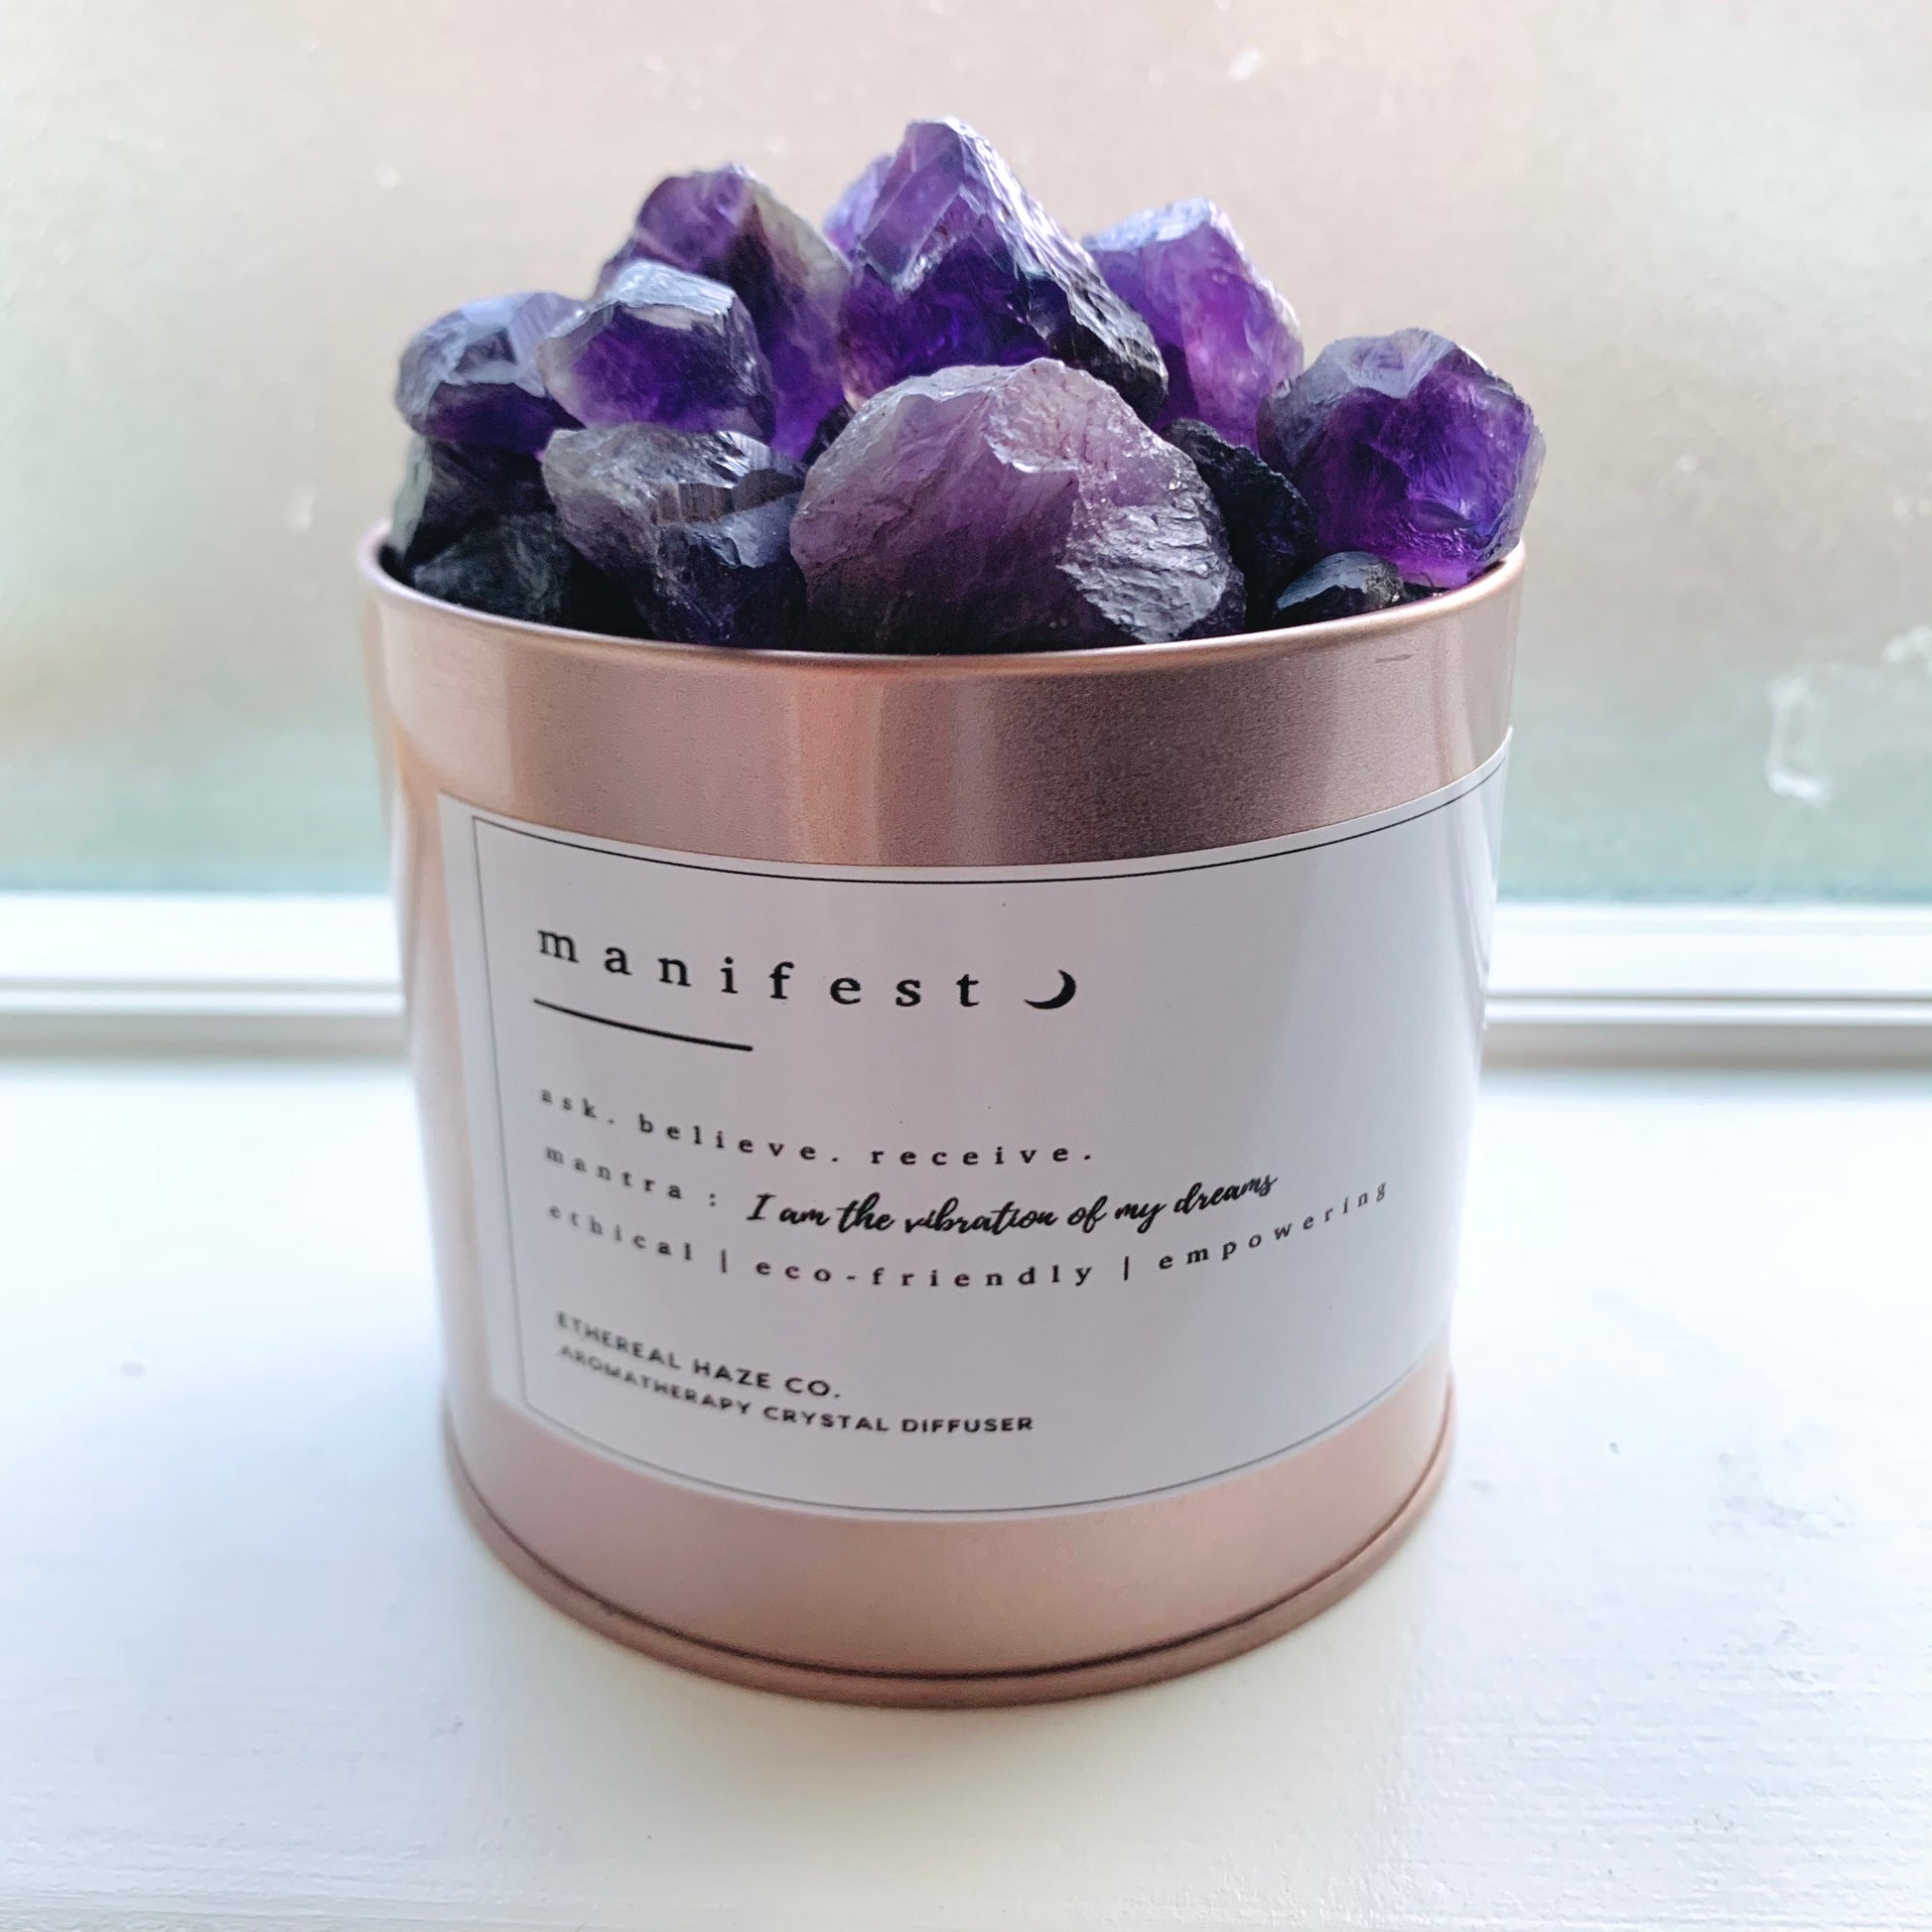 "MANIFEST" Amethyst Aromatherapy Diffuser - Ethereal Haze